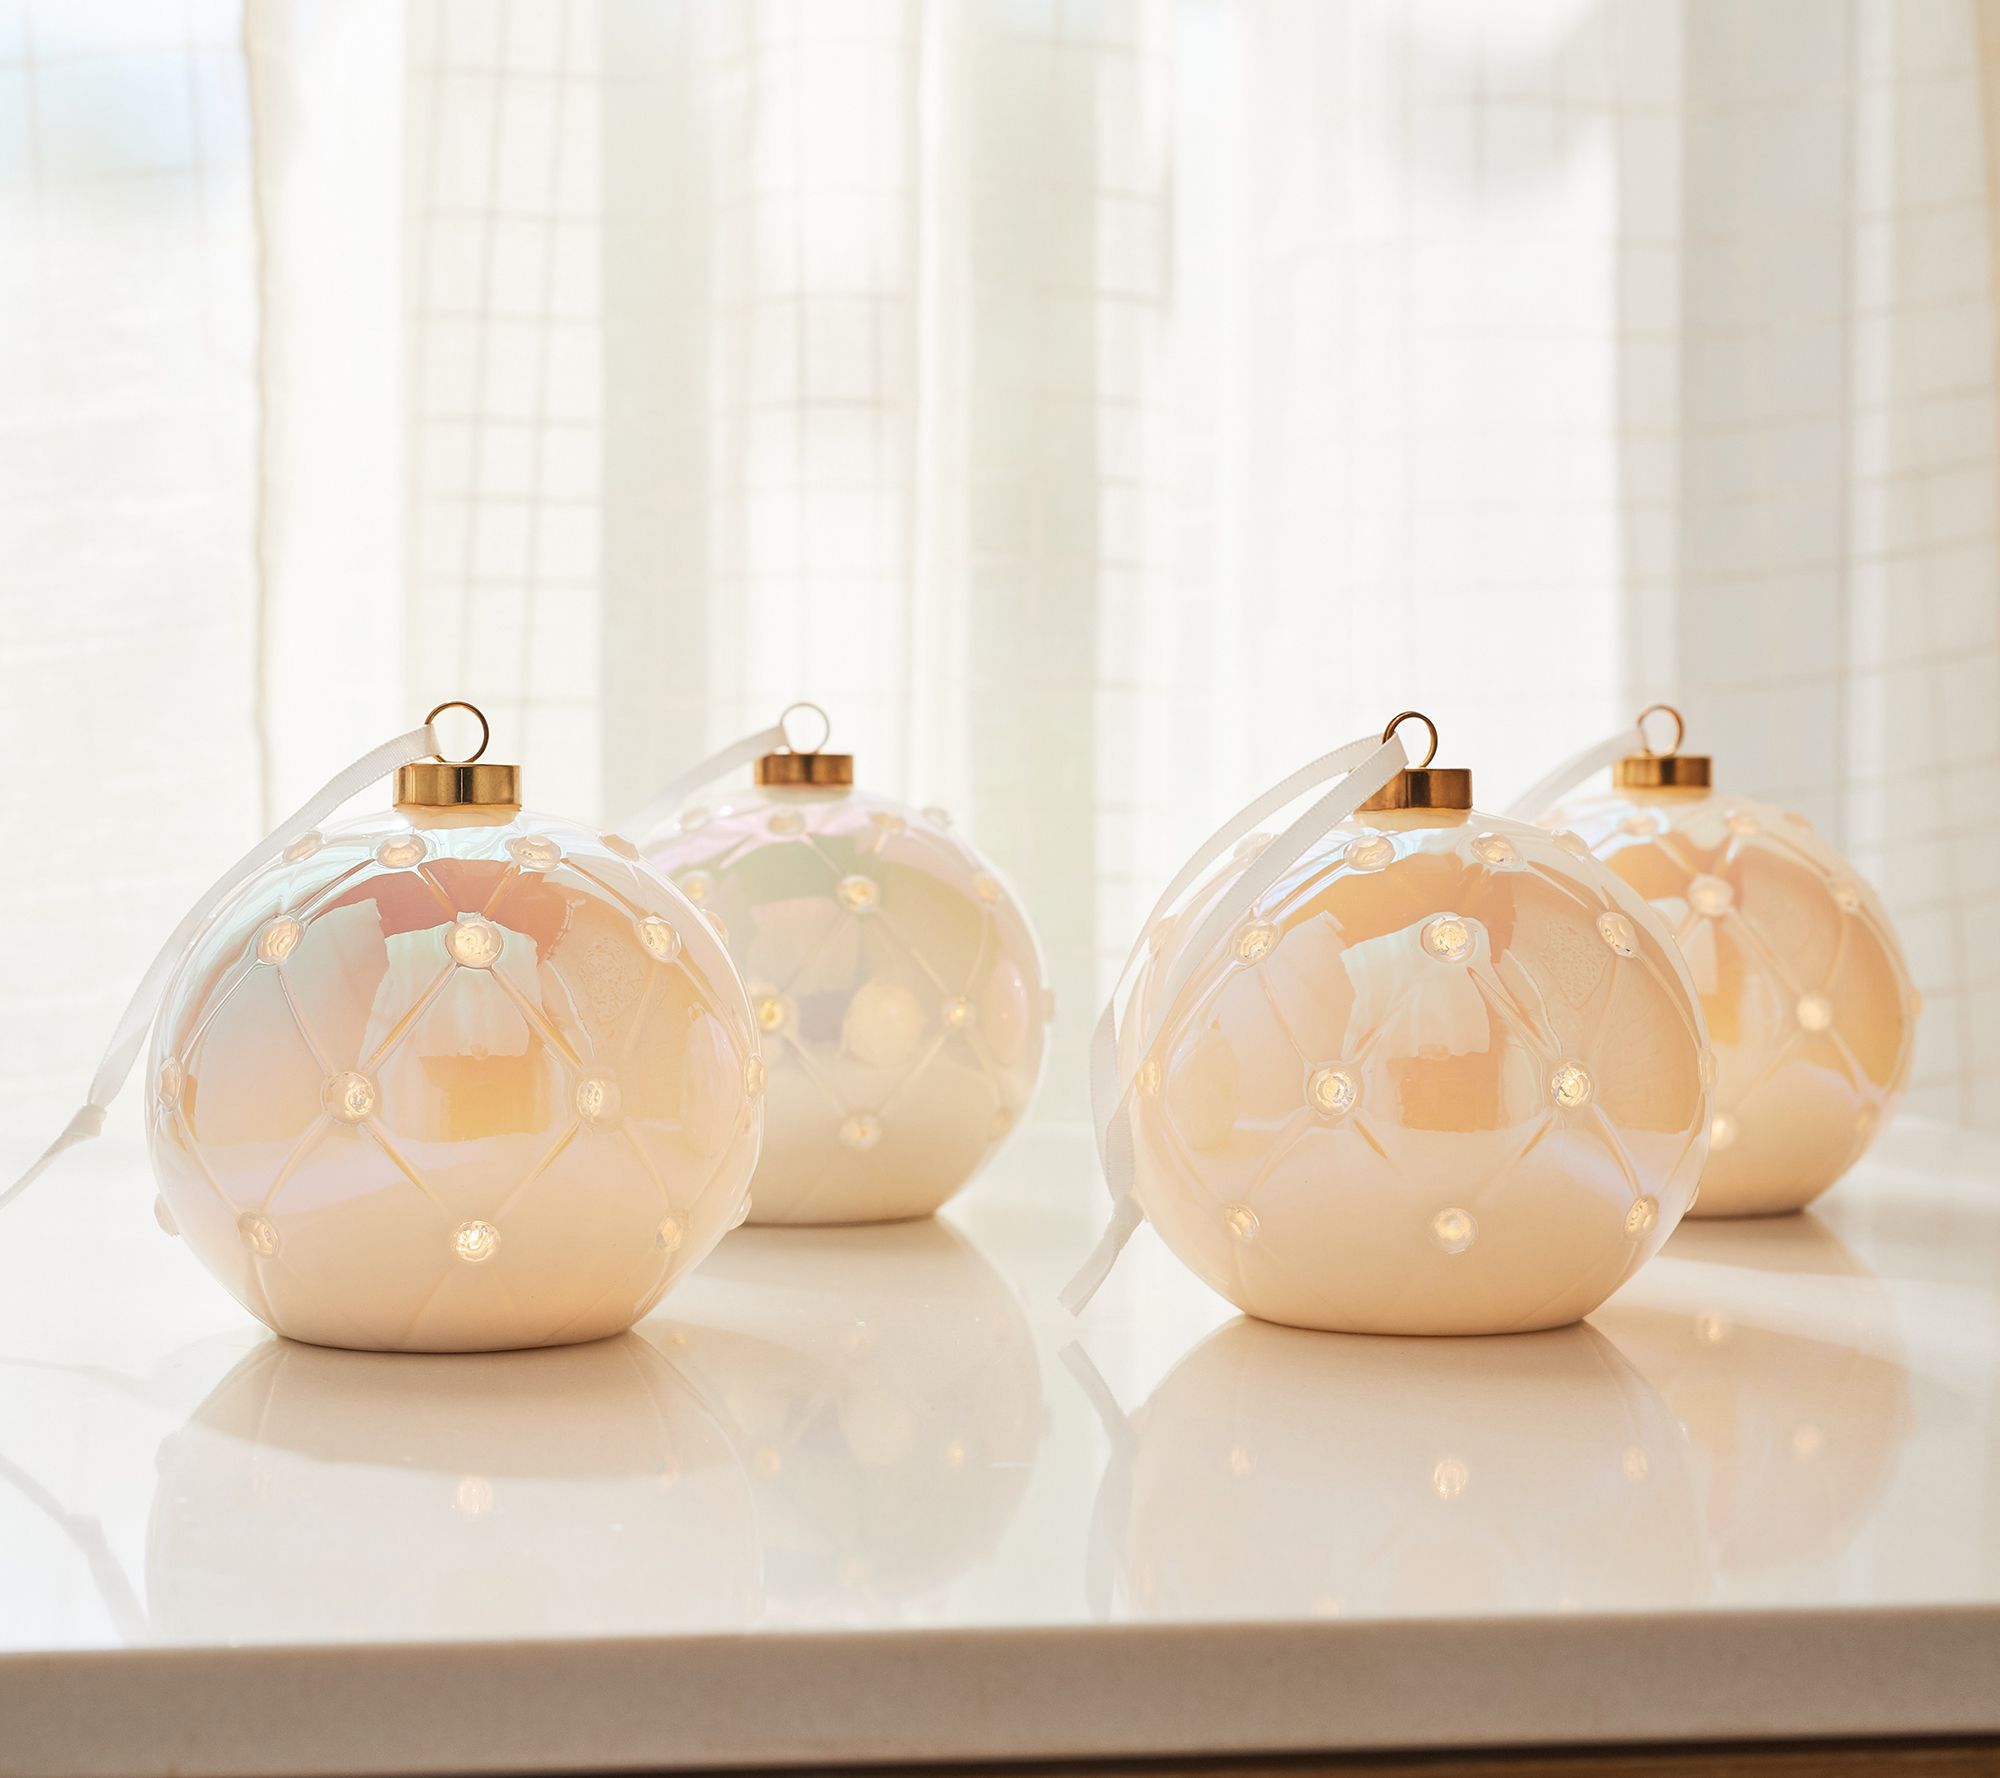 Lightscapes Set of 4 Iridescent Porcelain Ornaments with Gift Boxes 